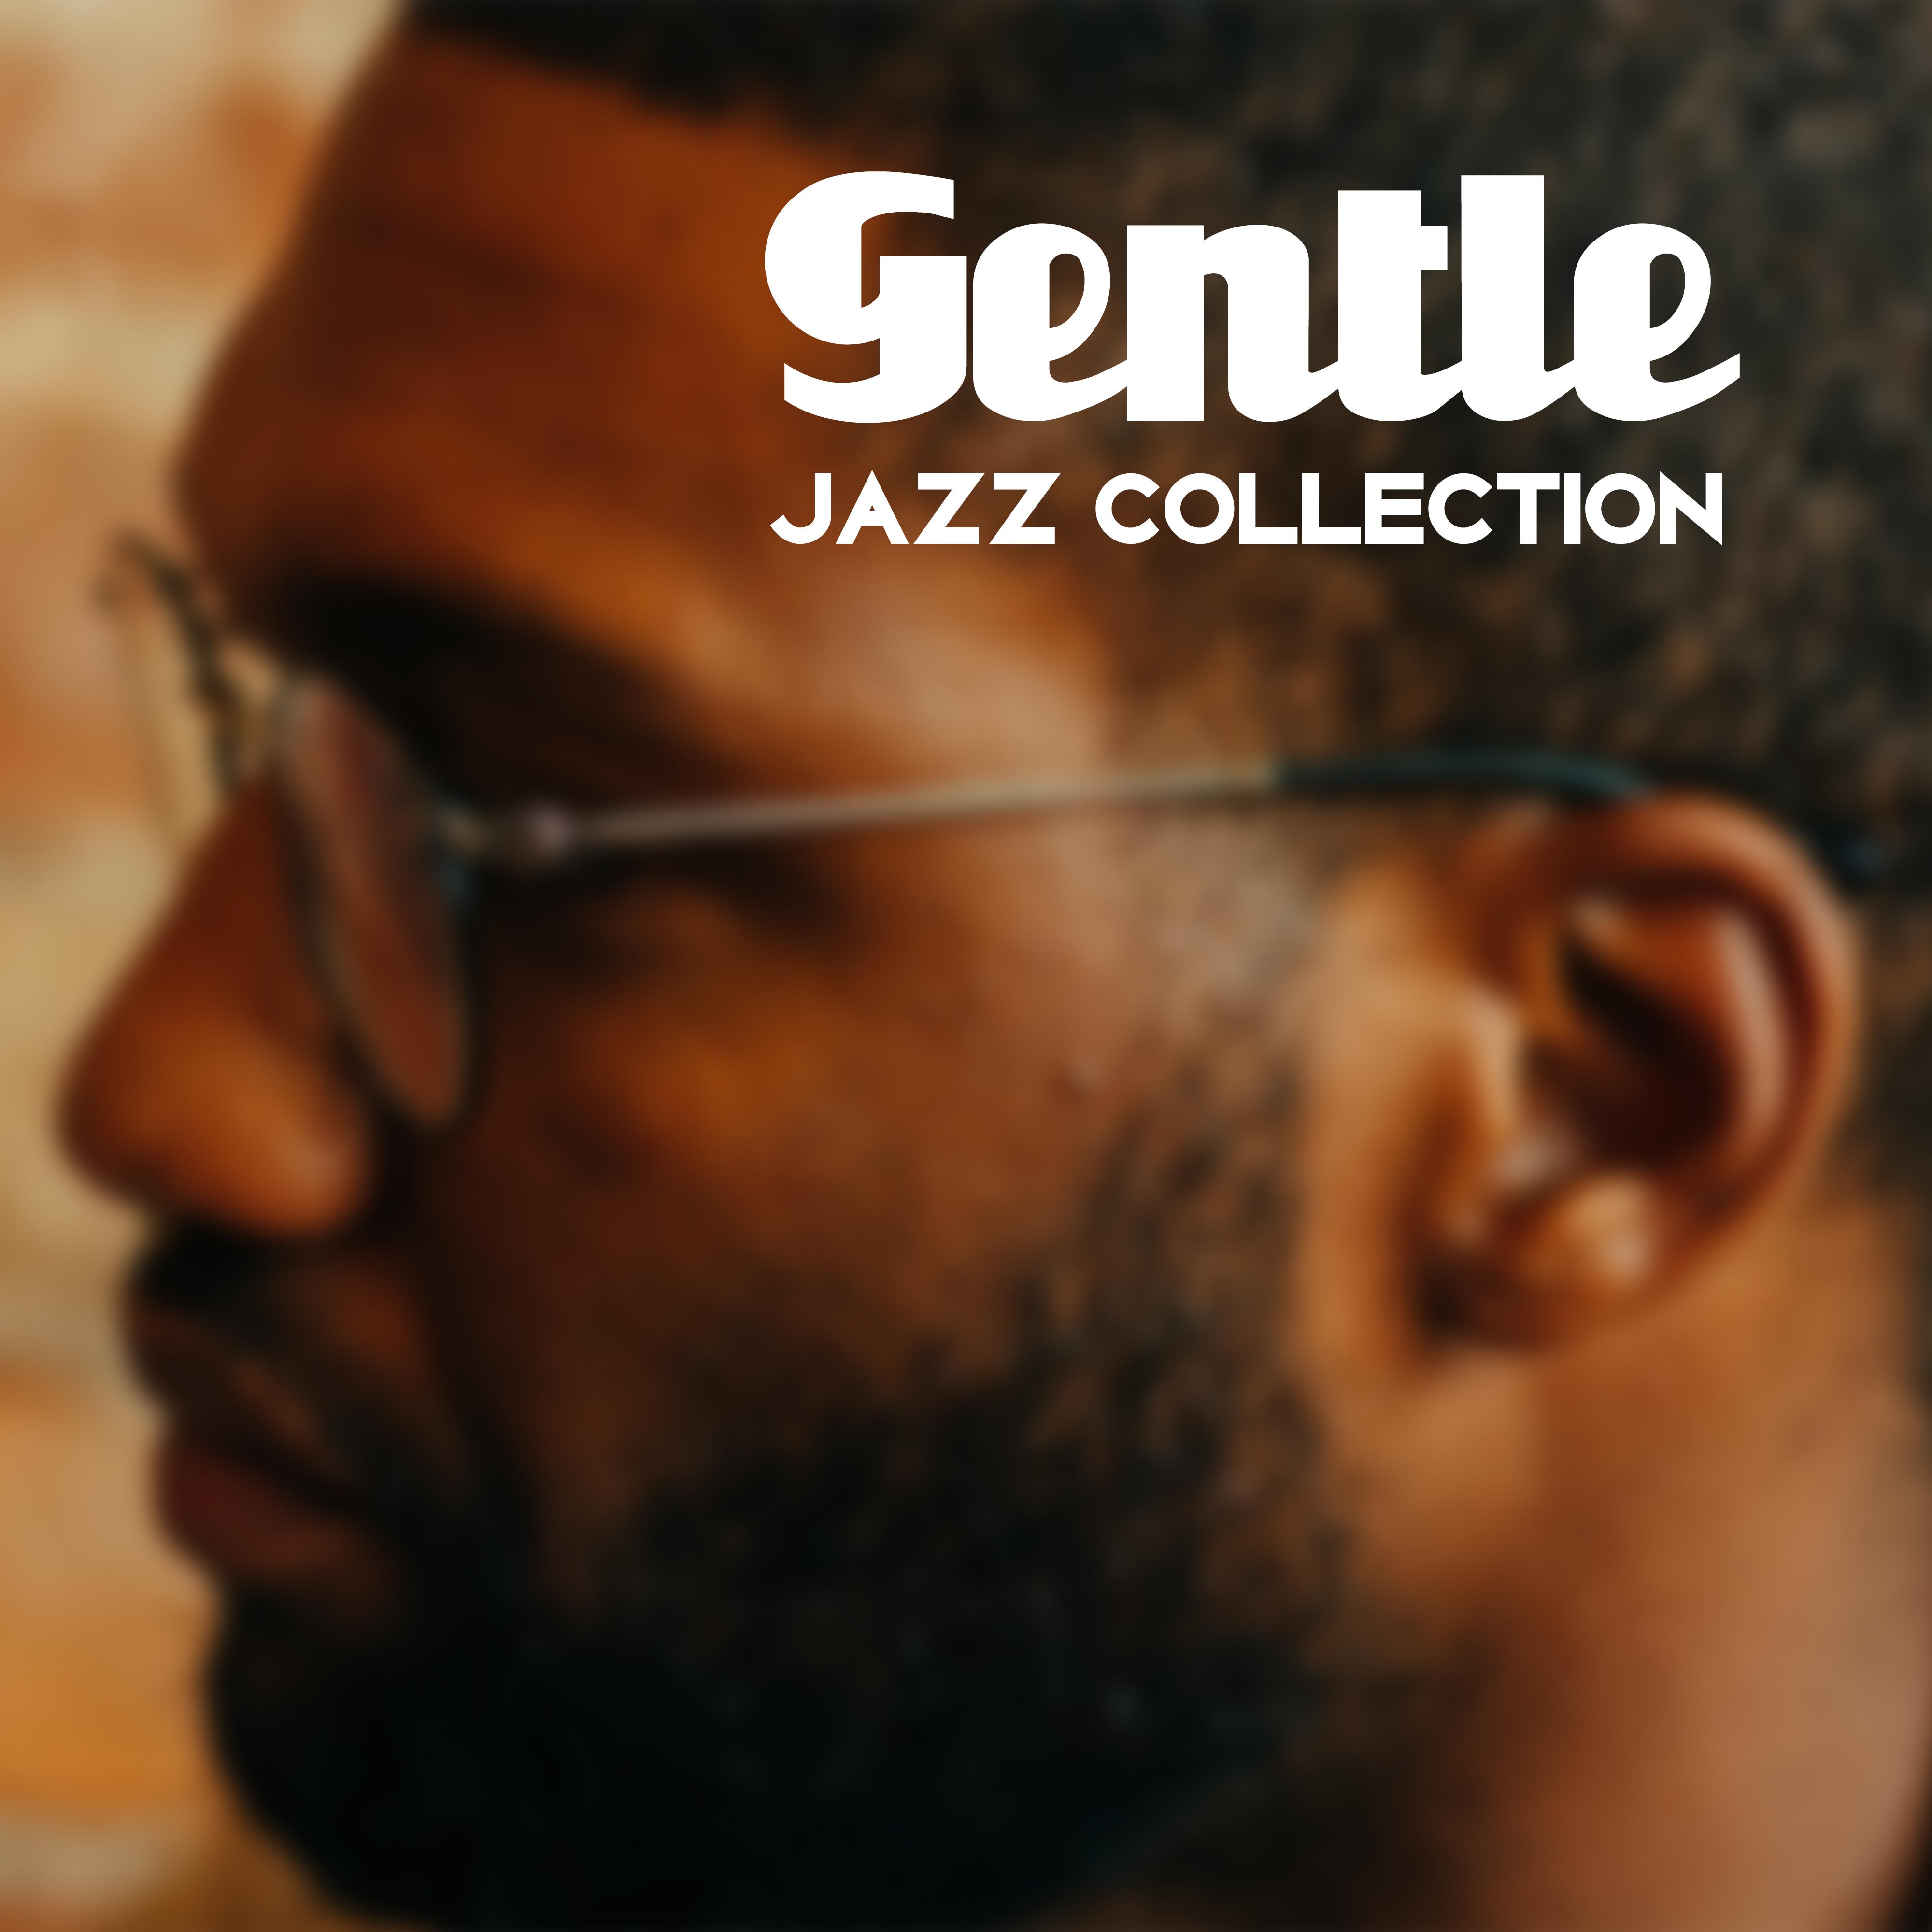 Gentle Jazz Collection  Jazz 2017, Soothing Jazz Compilation, Mellow Jazz, Lounge